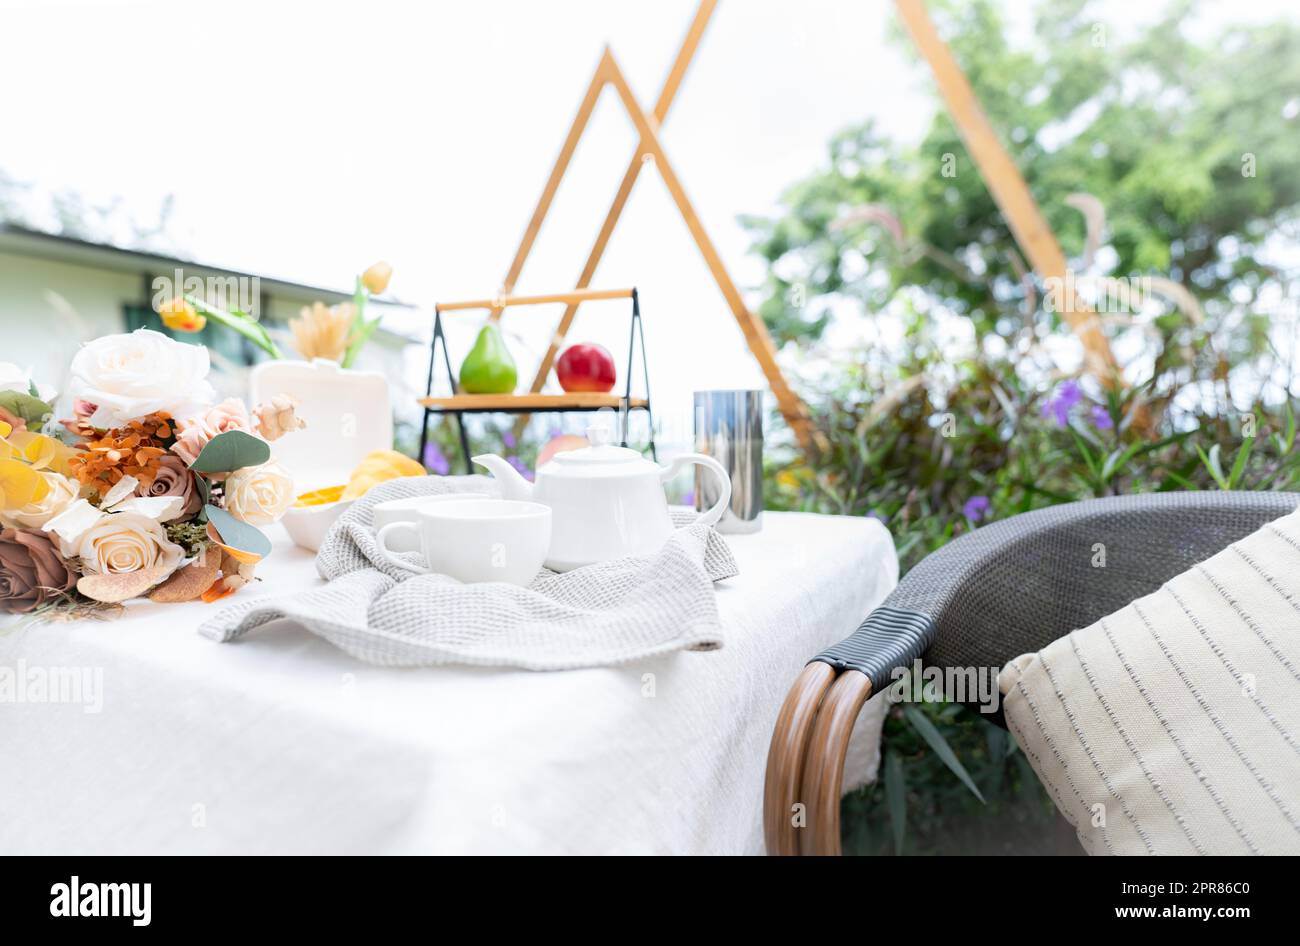 Coffee cup and flowers bouquet on table in garden. Afternoon tea concept. Home outdoor furniture. Wicker chair and table with white tablecloth in vintage style. Cozy chair and table on the terrace. Stock Photo